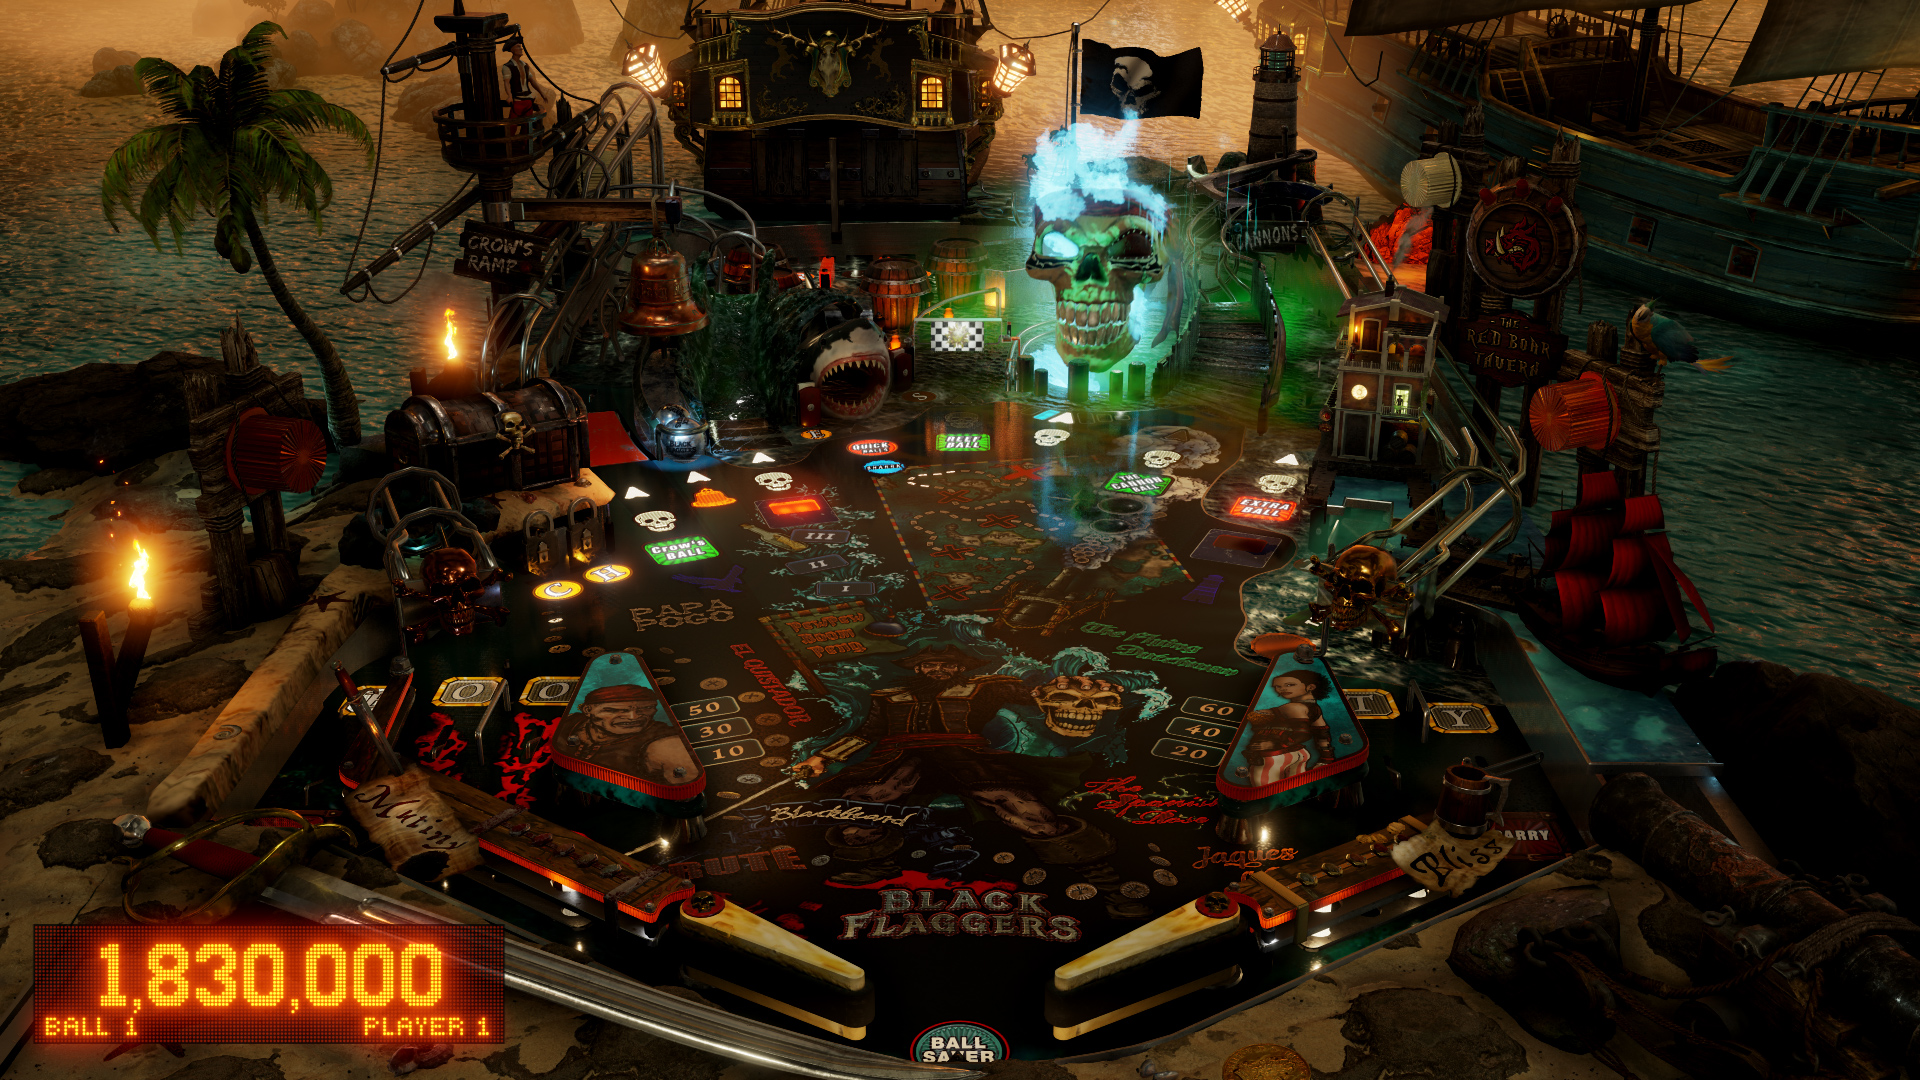 Free Download Pinball Wicked - Supporter Upgrade Rar